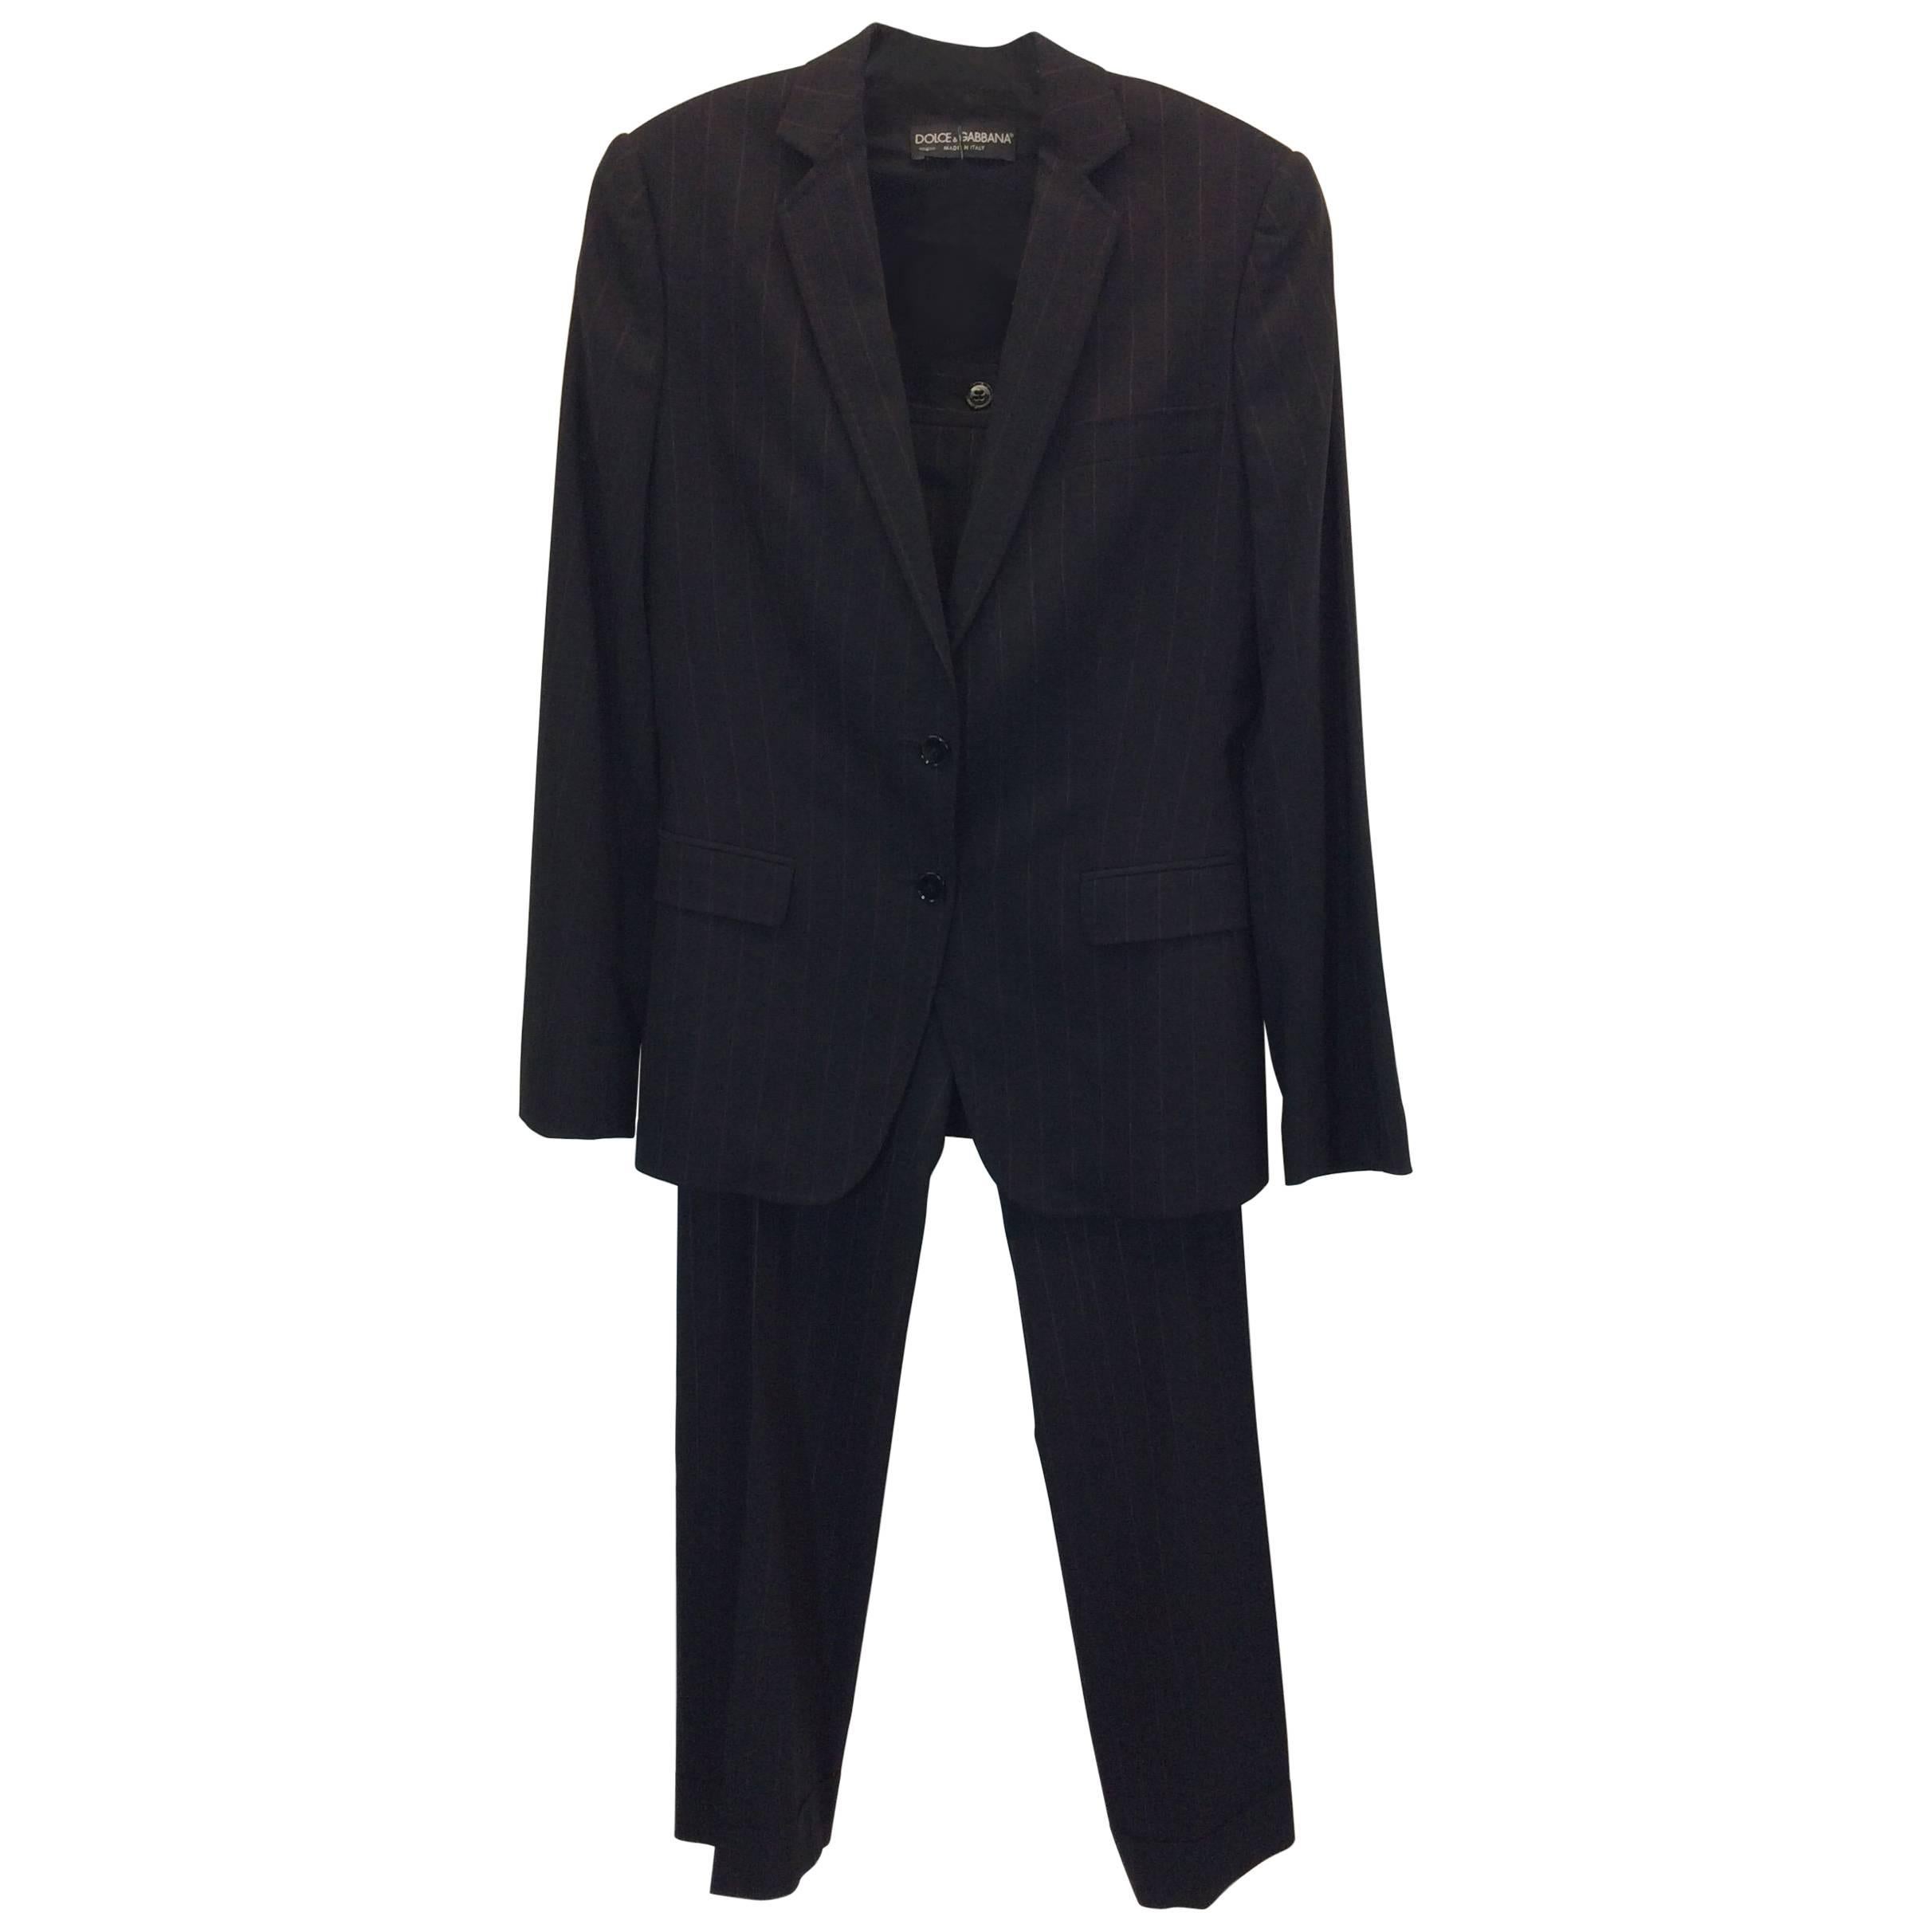 Dolce & Gabbana Black Pantsuit with Red Toned Pinstripes For Sale